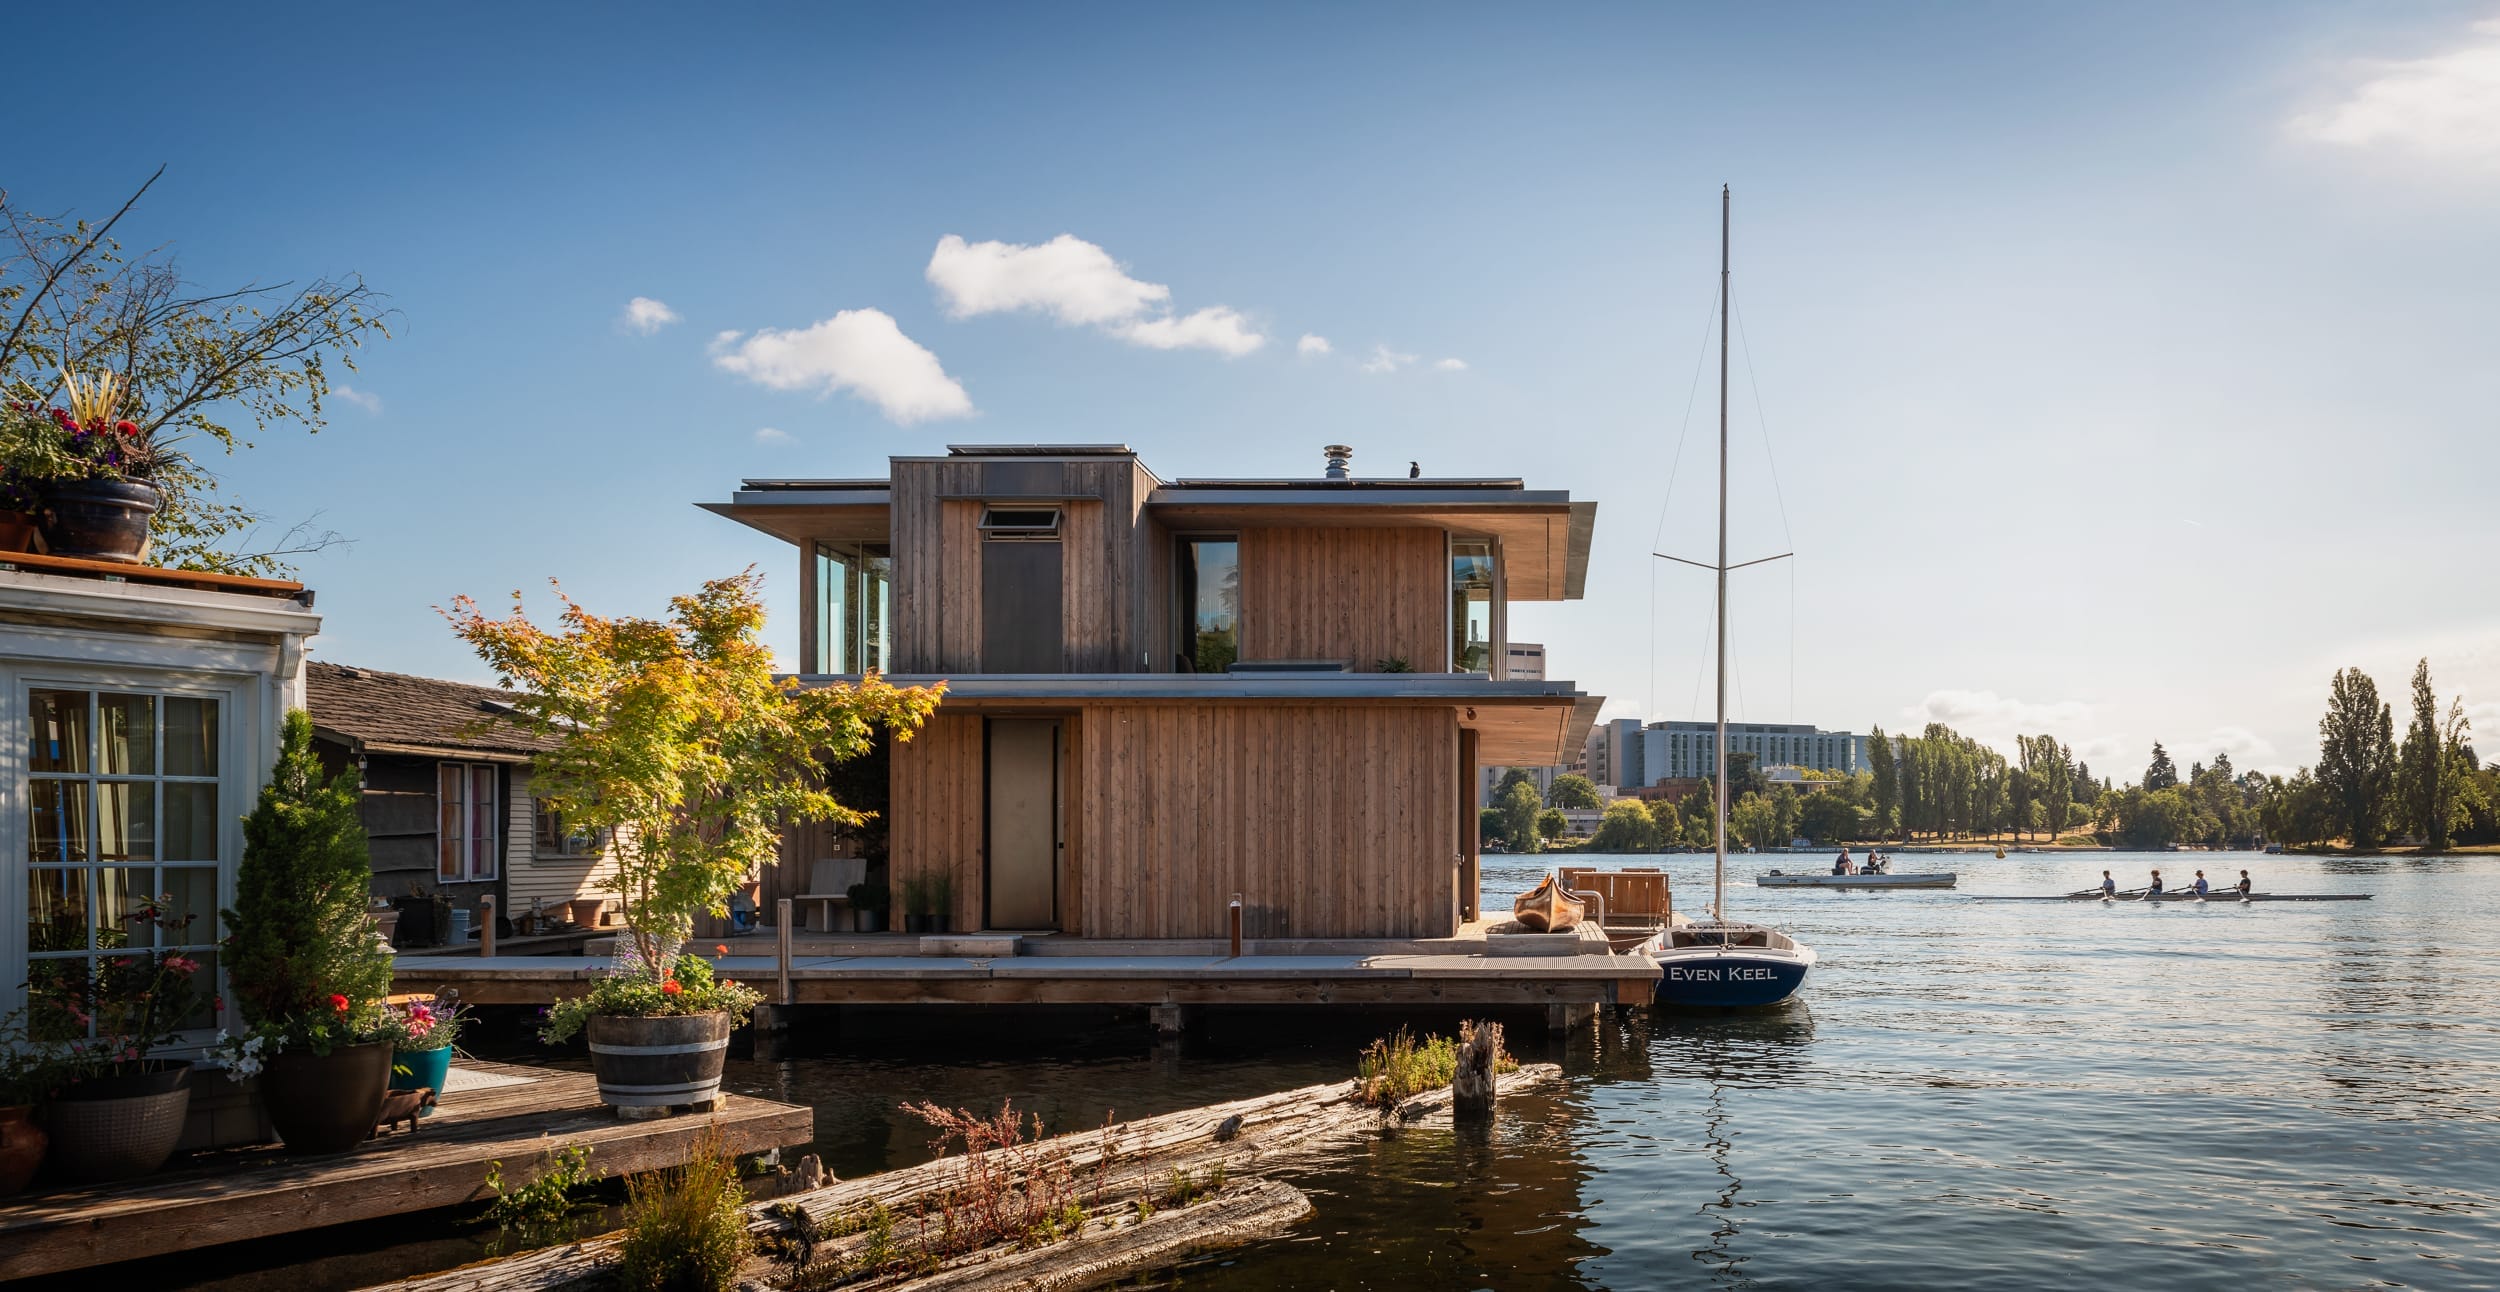 A modern home on a dock in a body of water built by a carpenter.